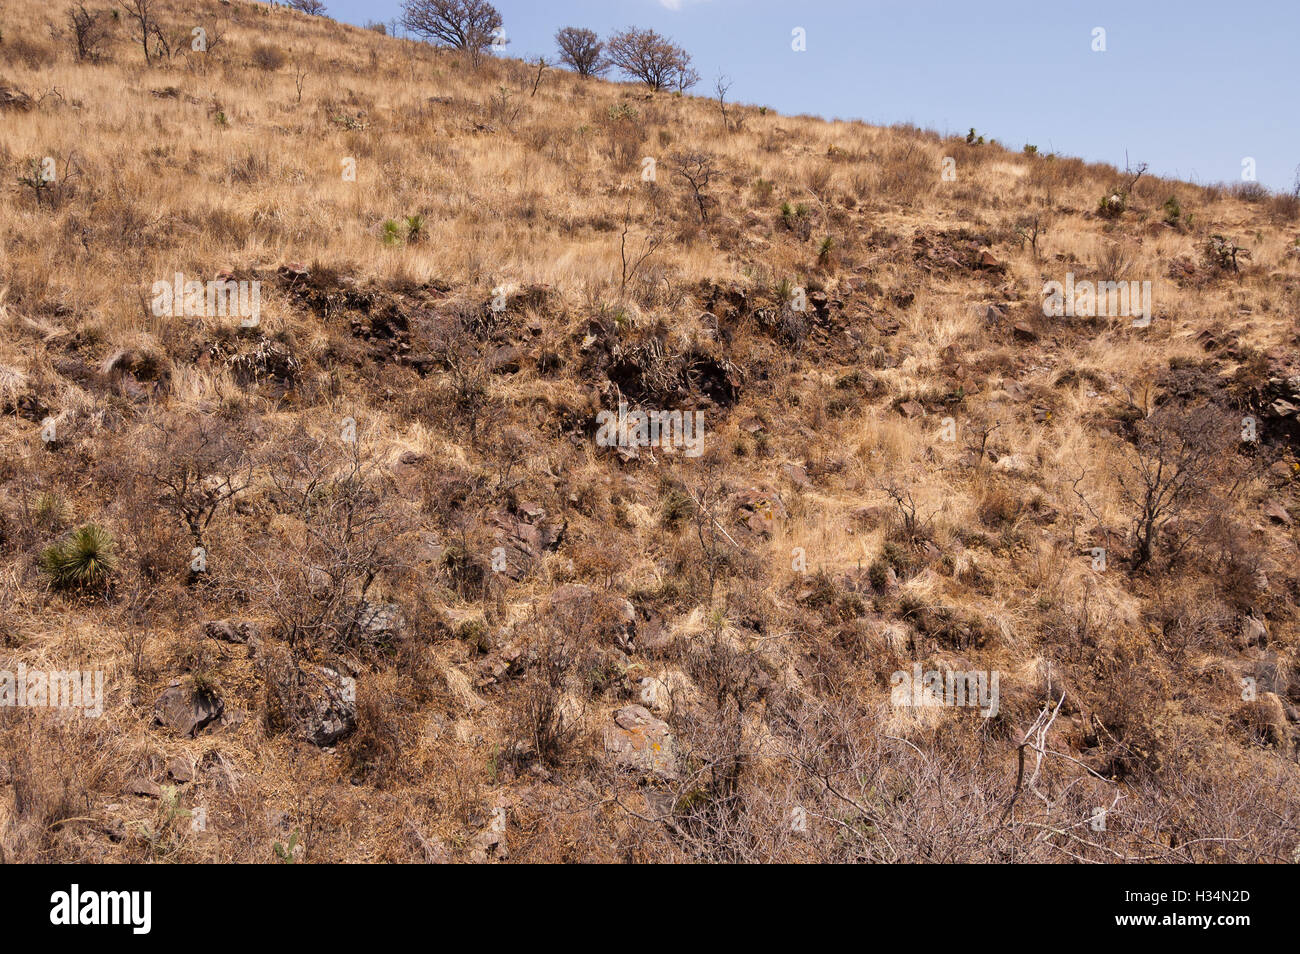 Shrubland vegetation in central Mexico Stock Photo